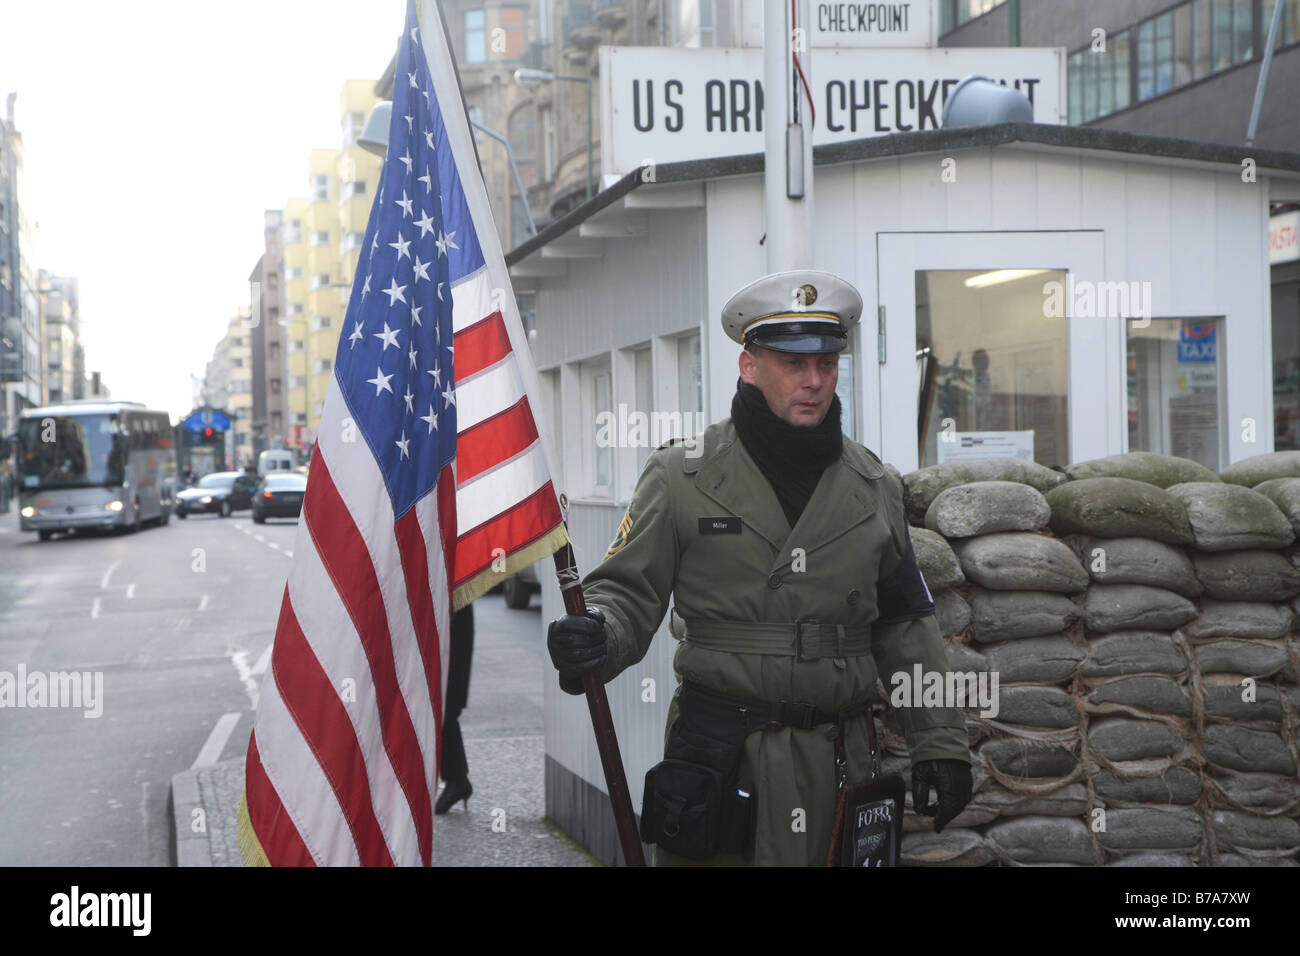 American soldier guarding the Checkpoint, extra for tourists, Friedrichsstrasse Street, Berlin, Germany, Europe Stock Photo